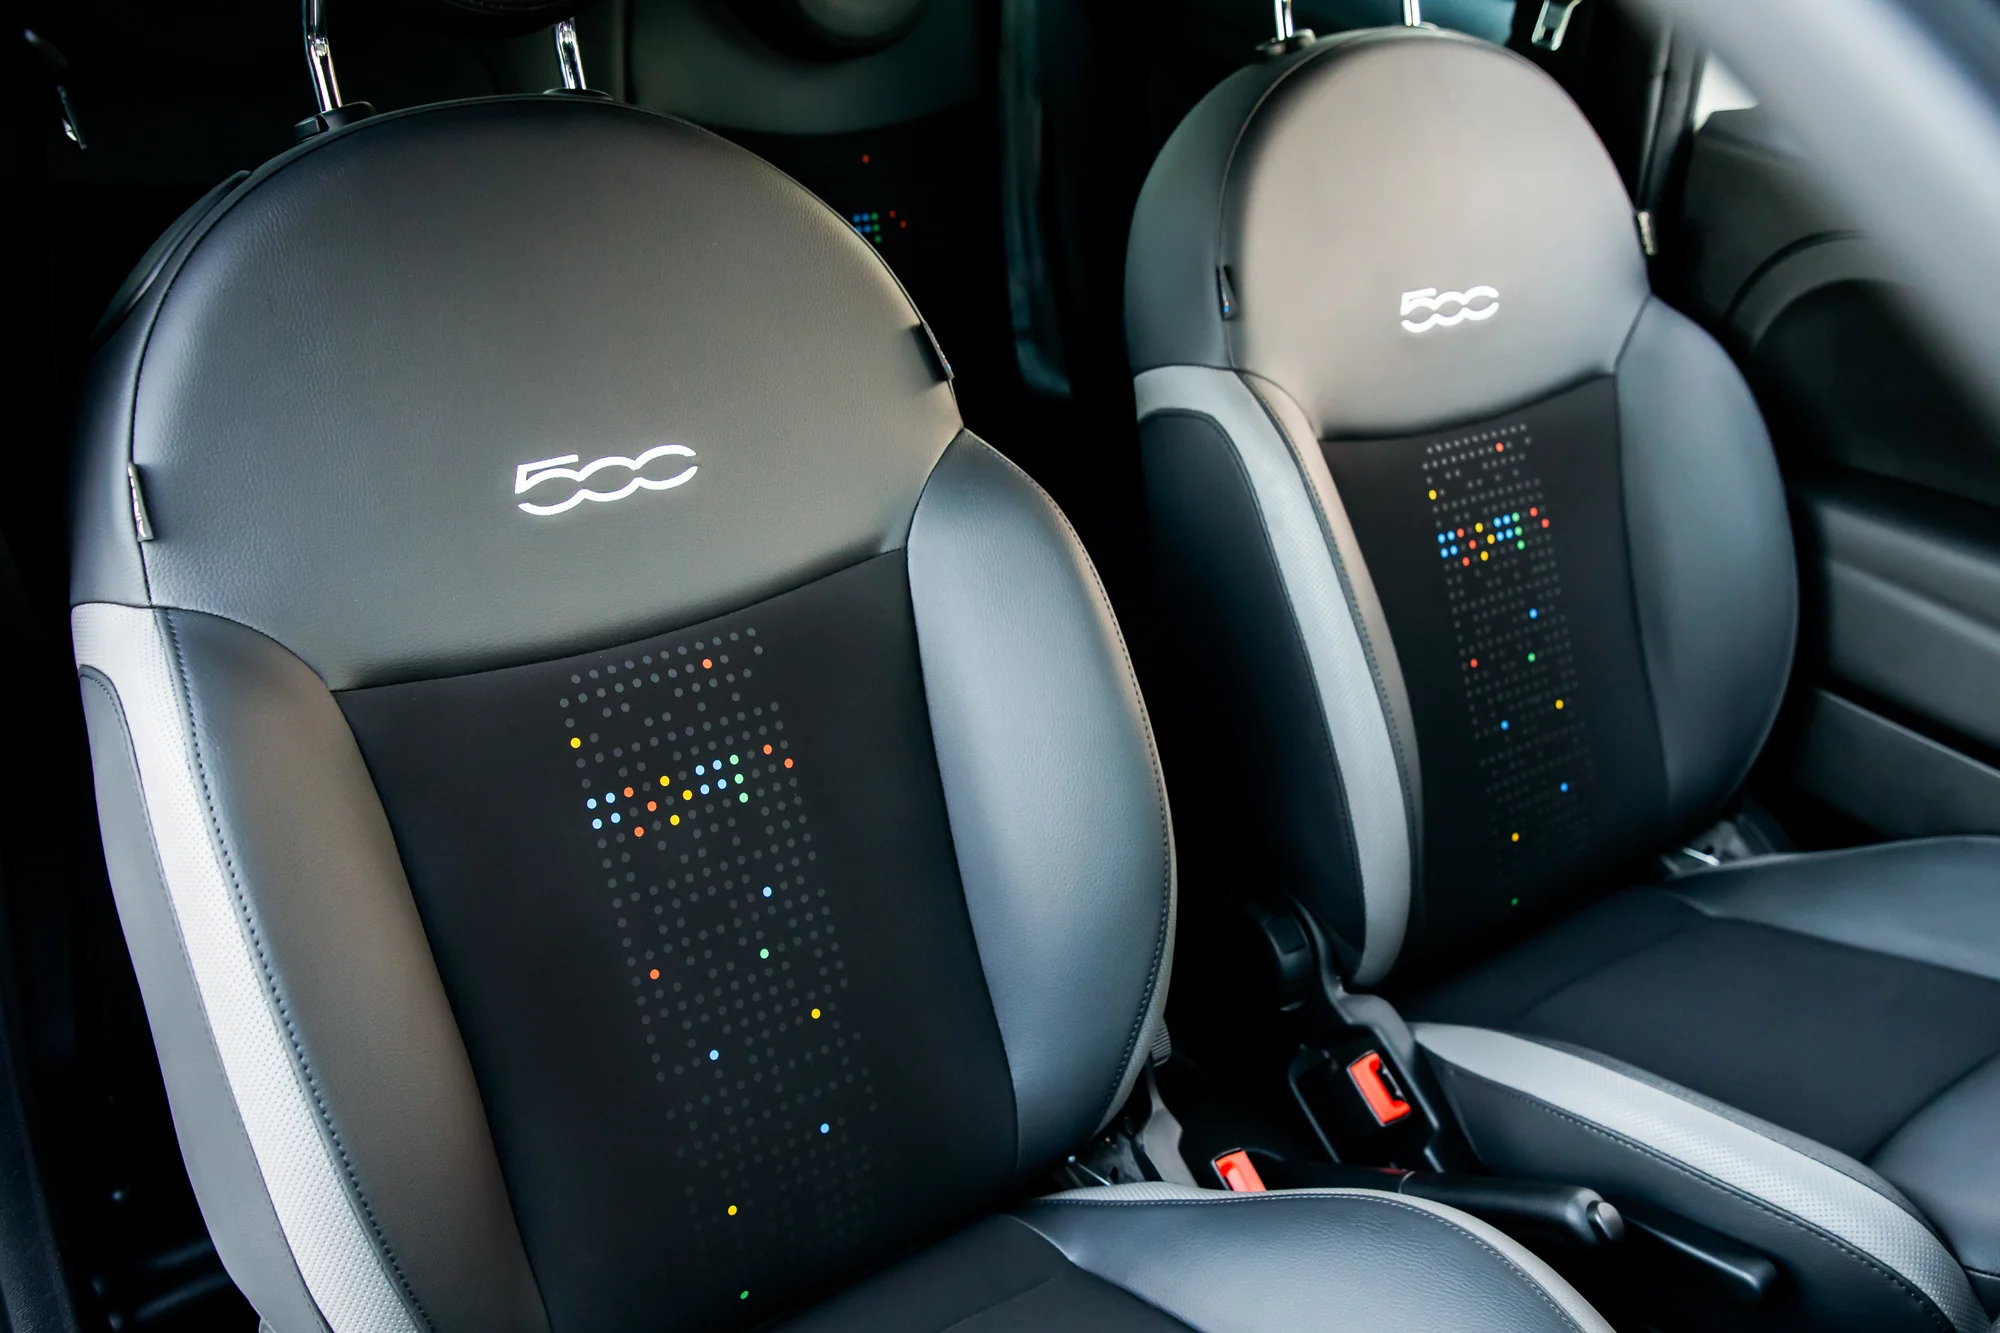 A close-up of the Fiat 500's interior seats, showing Google coloring.